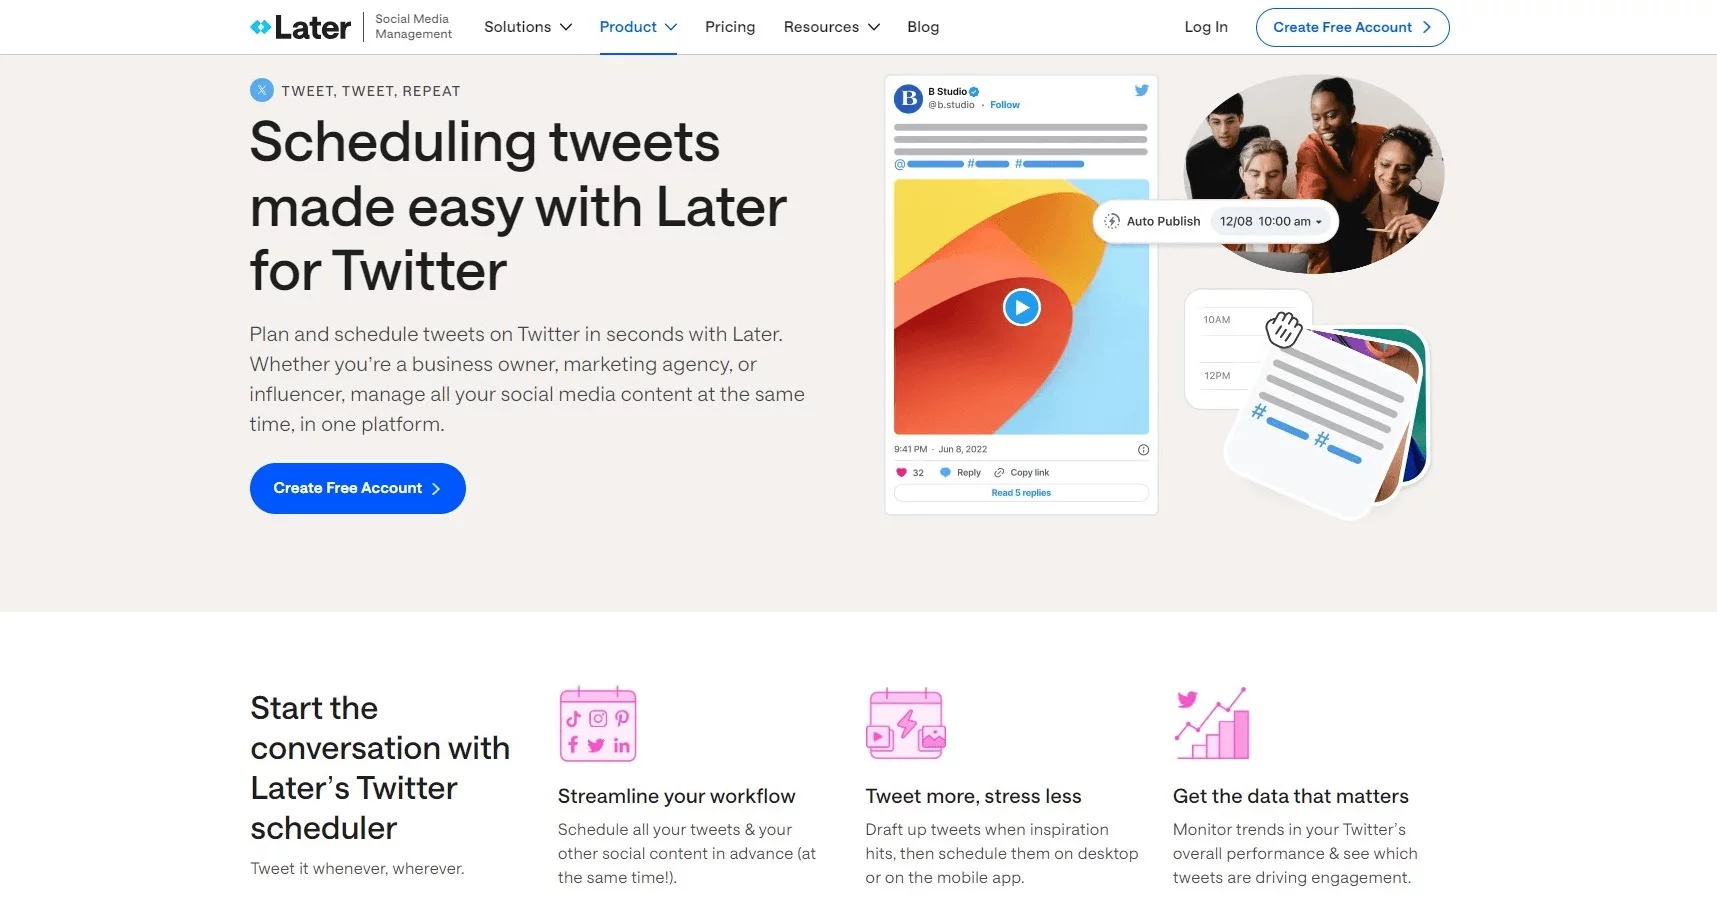 Later scheduling tweets's landing page